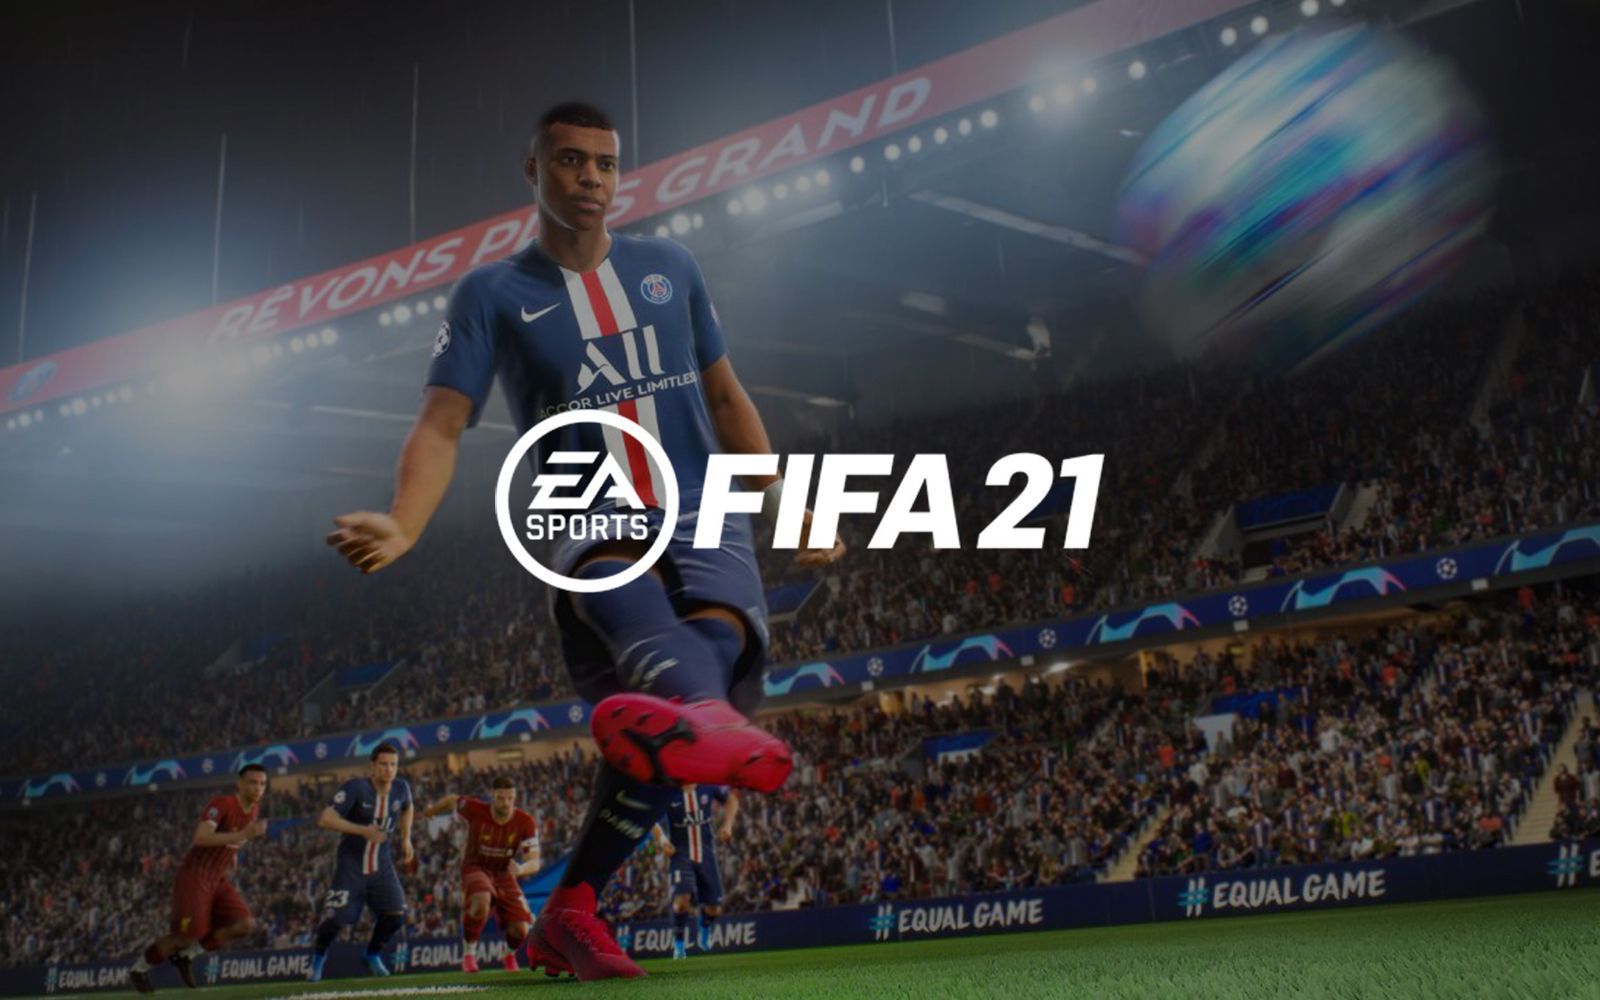 EA SPORTS FIFA 21 – or just known as FIFA 21 mobile – is a video